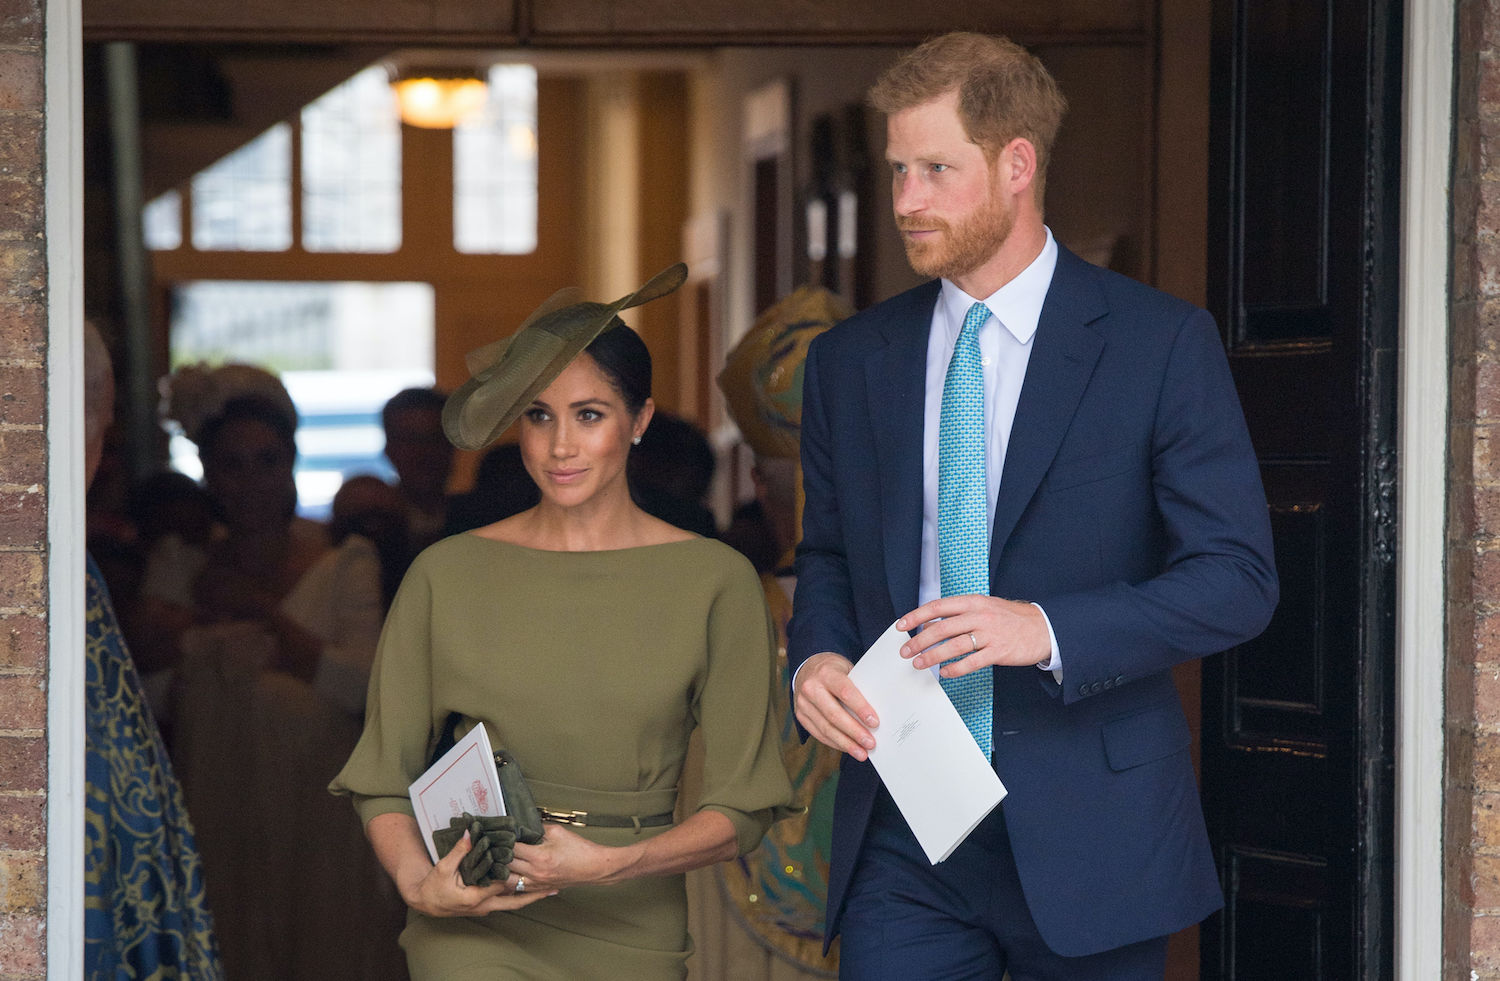 Meghan Markle and Prince Harry after attending the christening of Prince Louis at the Chapel Royal, St James's Palace on July 09, 2018